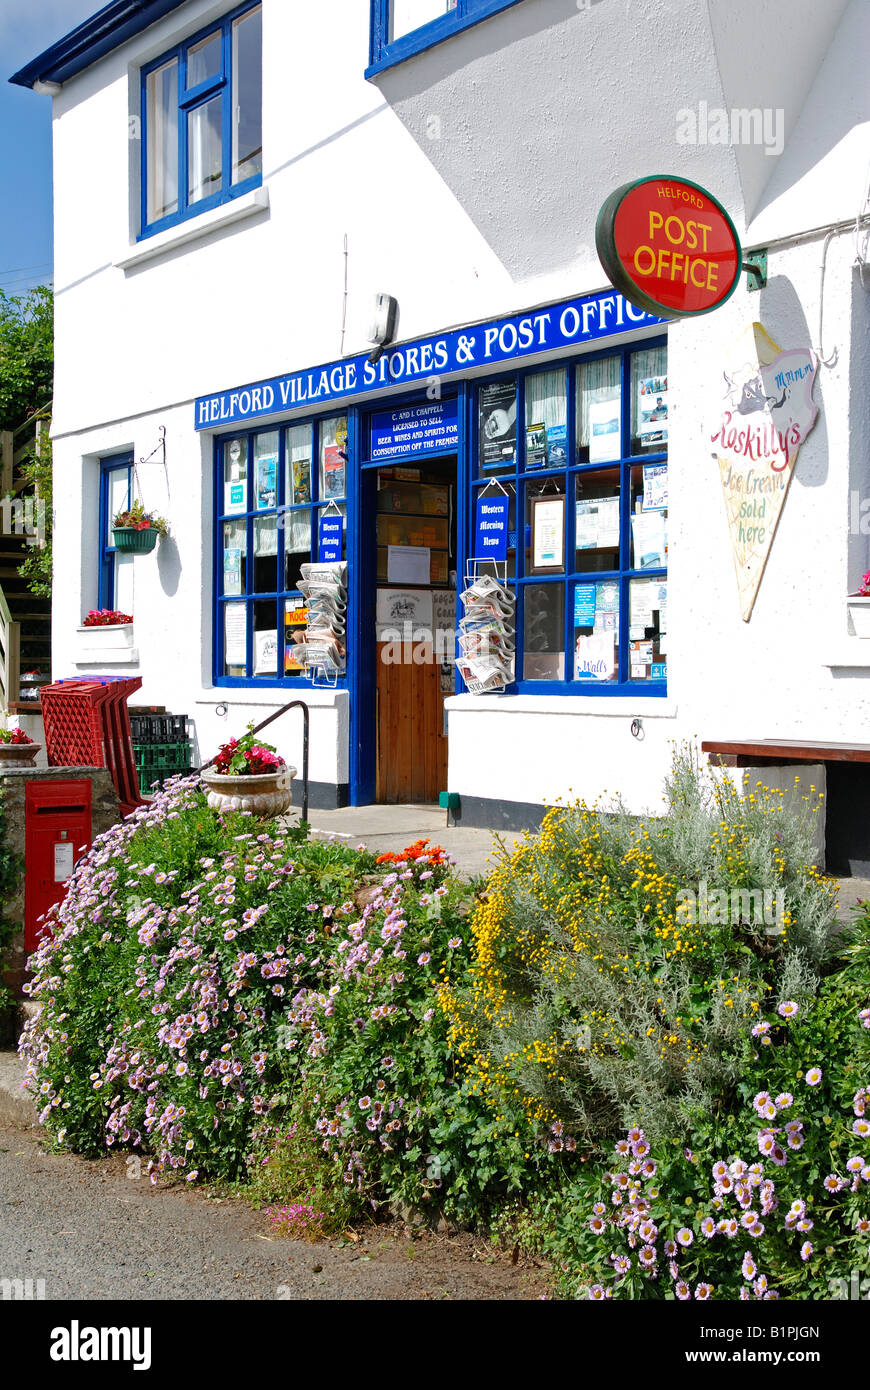 a village post office in helford,cornwall,england,uk Stock Photo